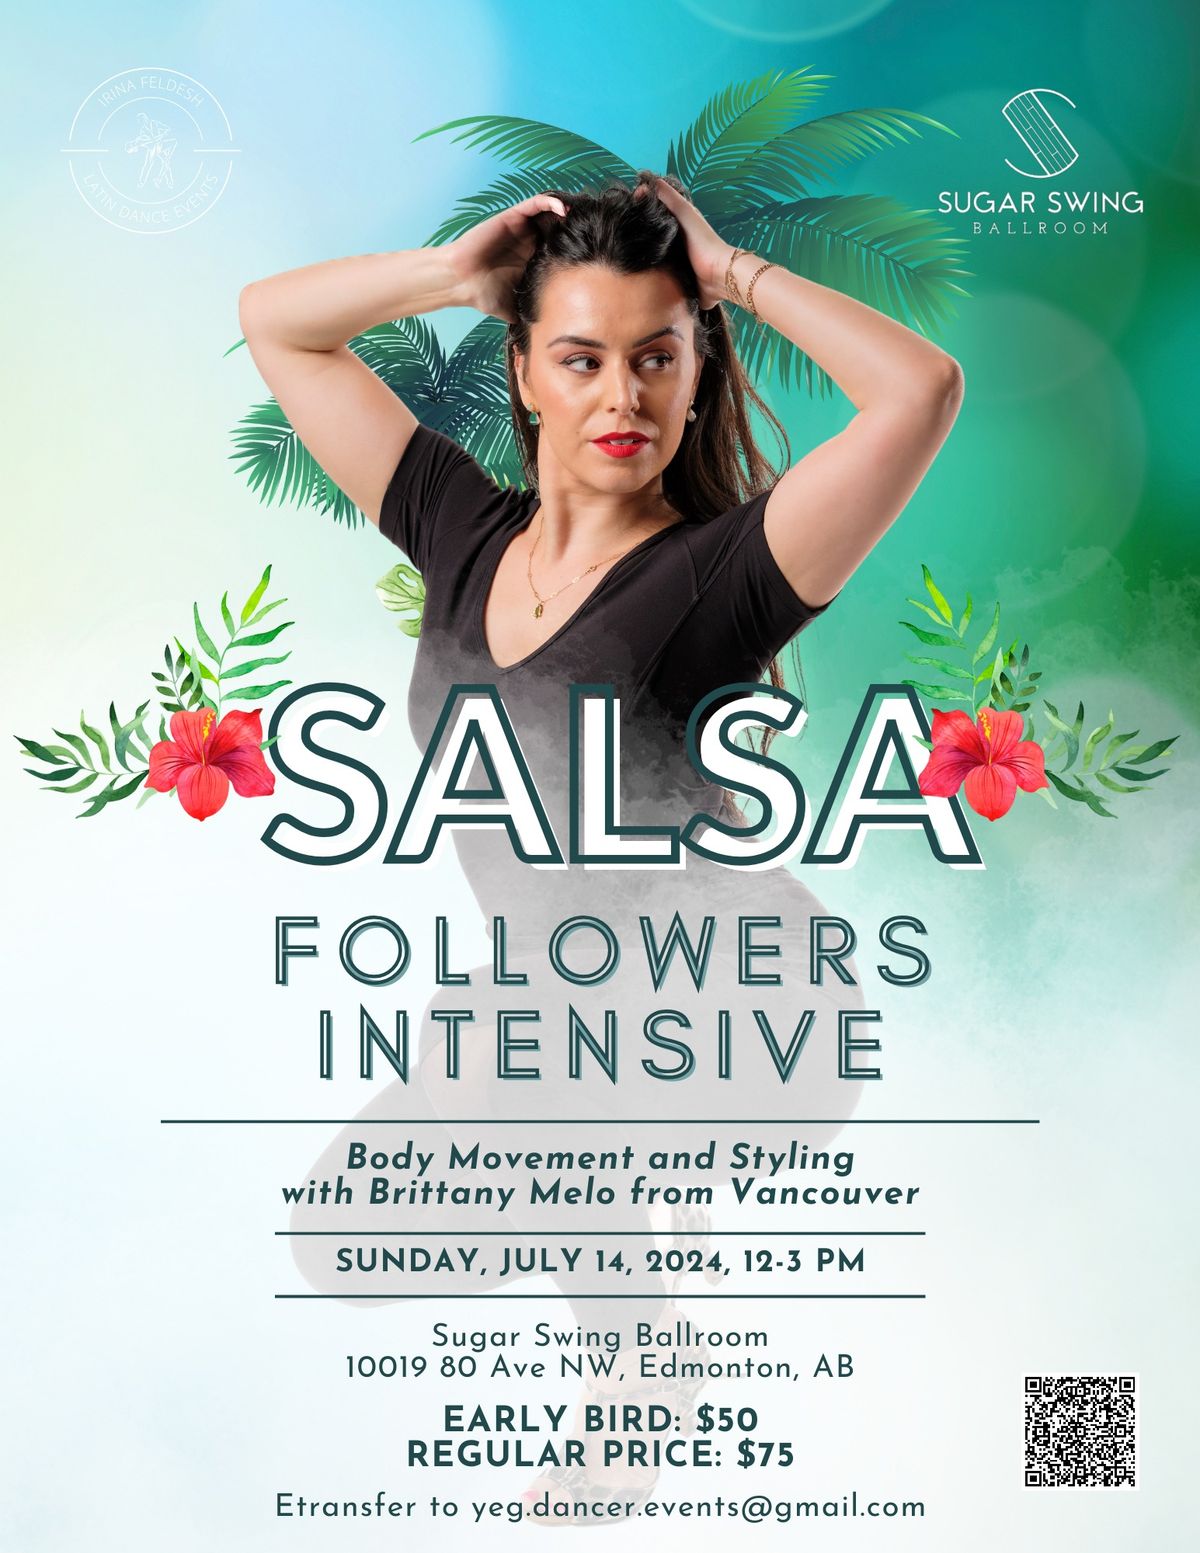 Salsa Followers Intensive with Brittany Melo from Vancouver - July 14, 2024